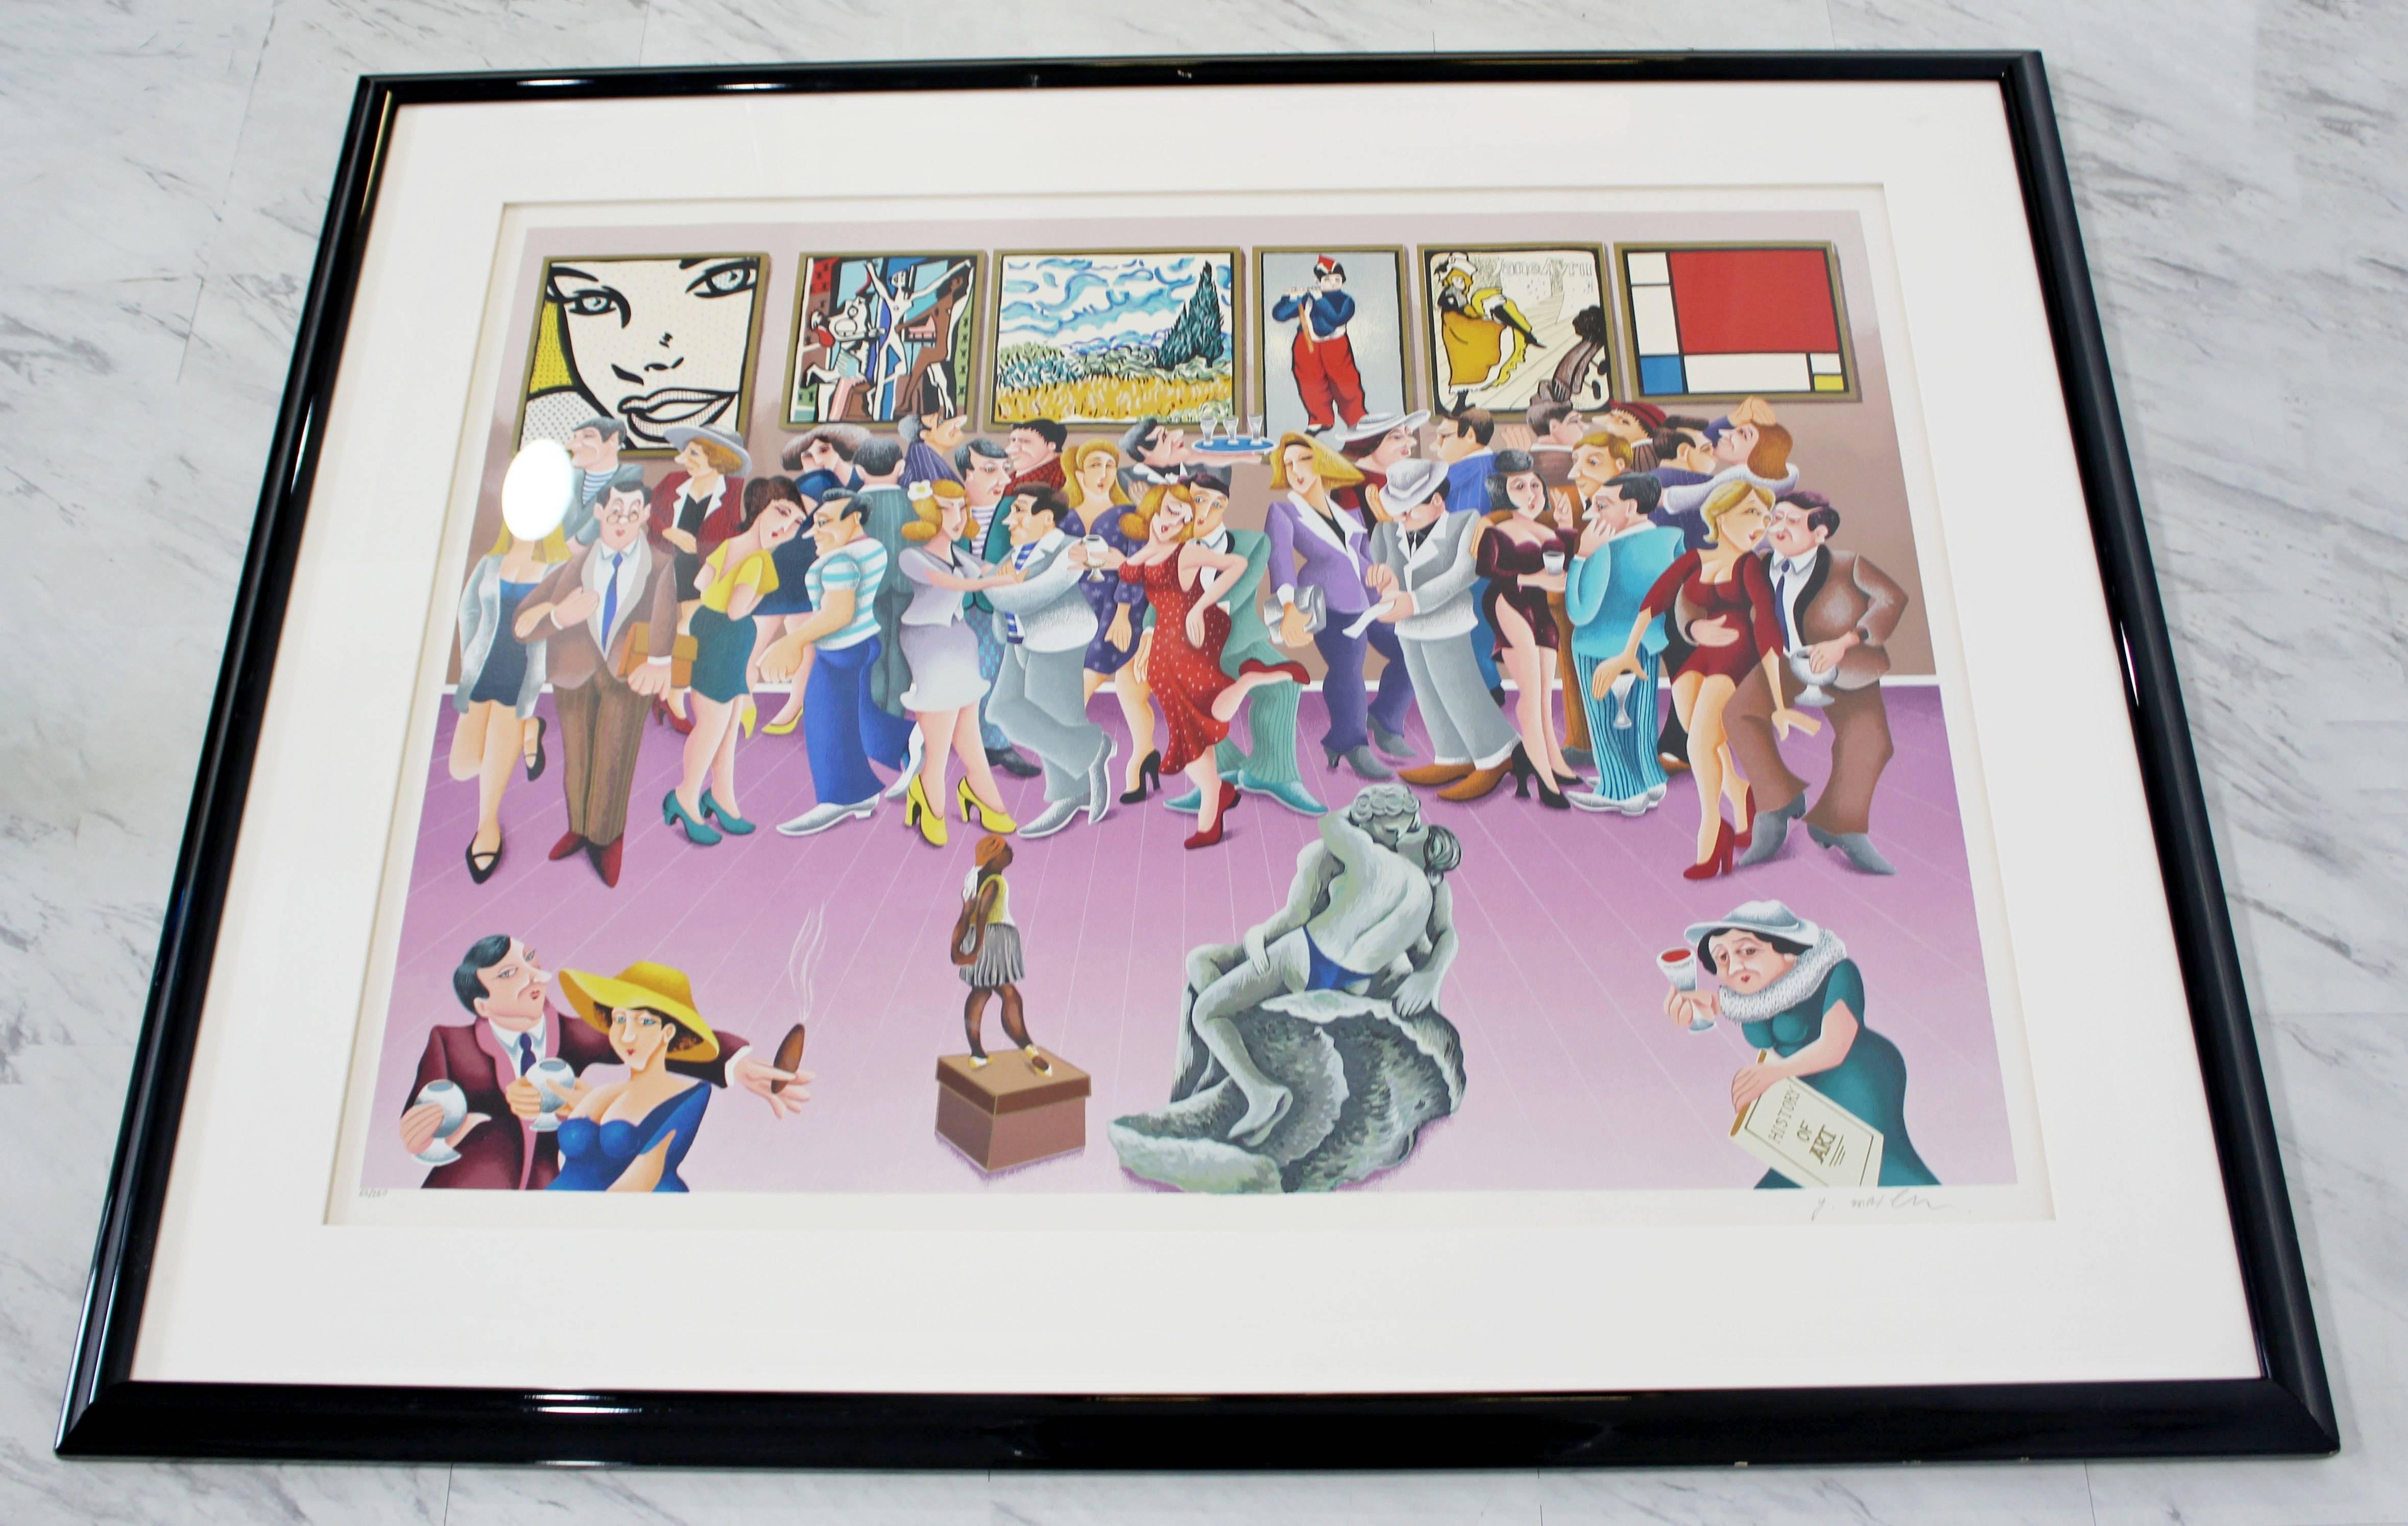 For your consideration is a fabulous, framed print of party goers at an art exhibit, signed and numbered 63/250. In excellent condition. The dimensions of the frame are 50.5